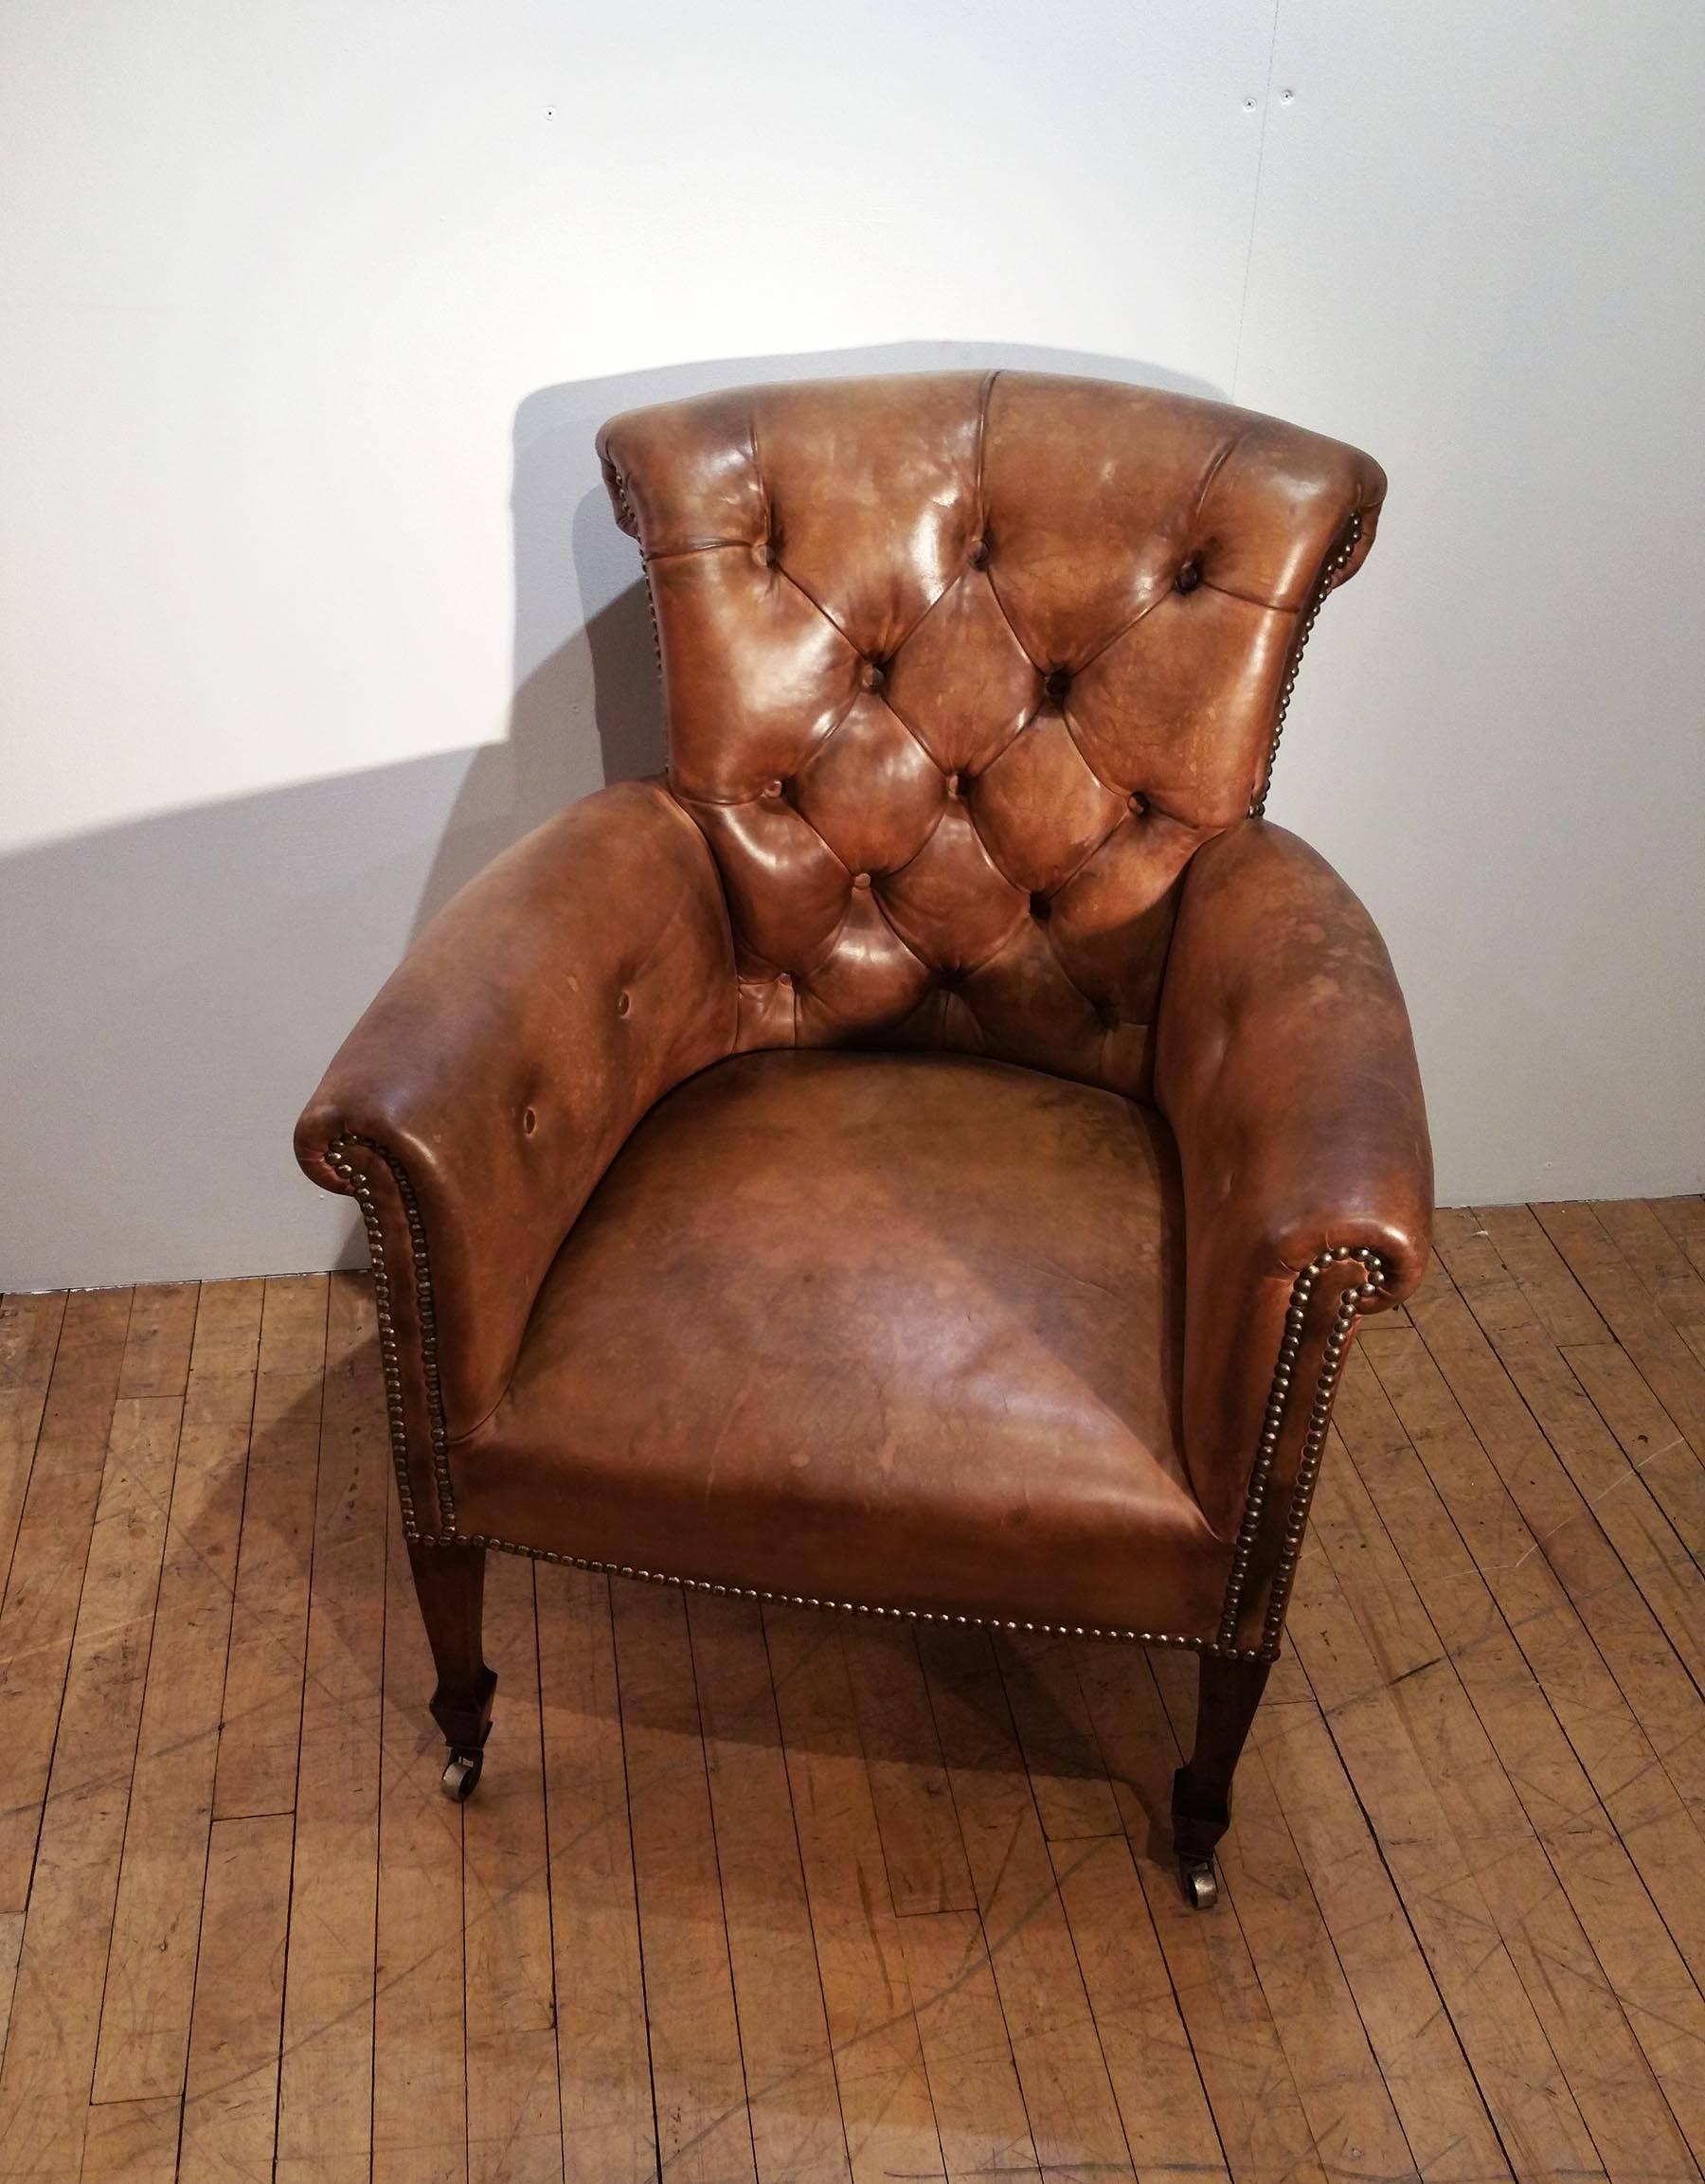 This very handsome pair of early 20th century tub chairs feature the original leather upholstery and brass castors. The chairs have a lovely scrolled back and curved arms, with deep buttoned detail and Stand on mahogany legs. Each chair measures 26